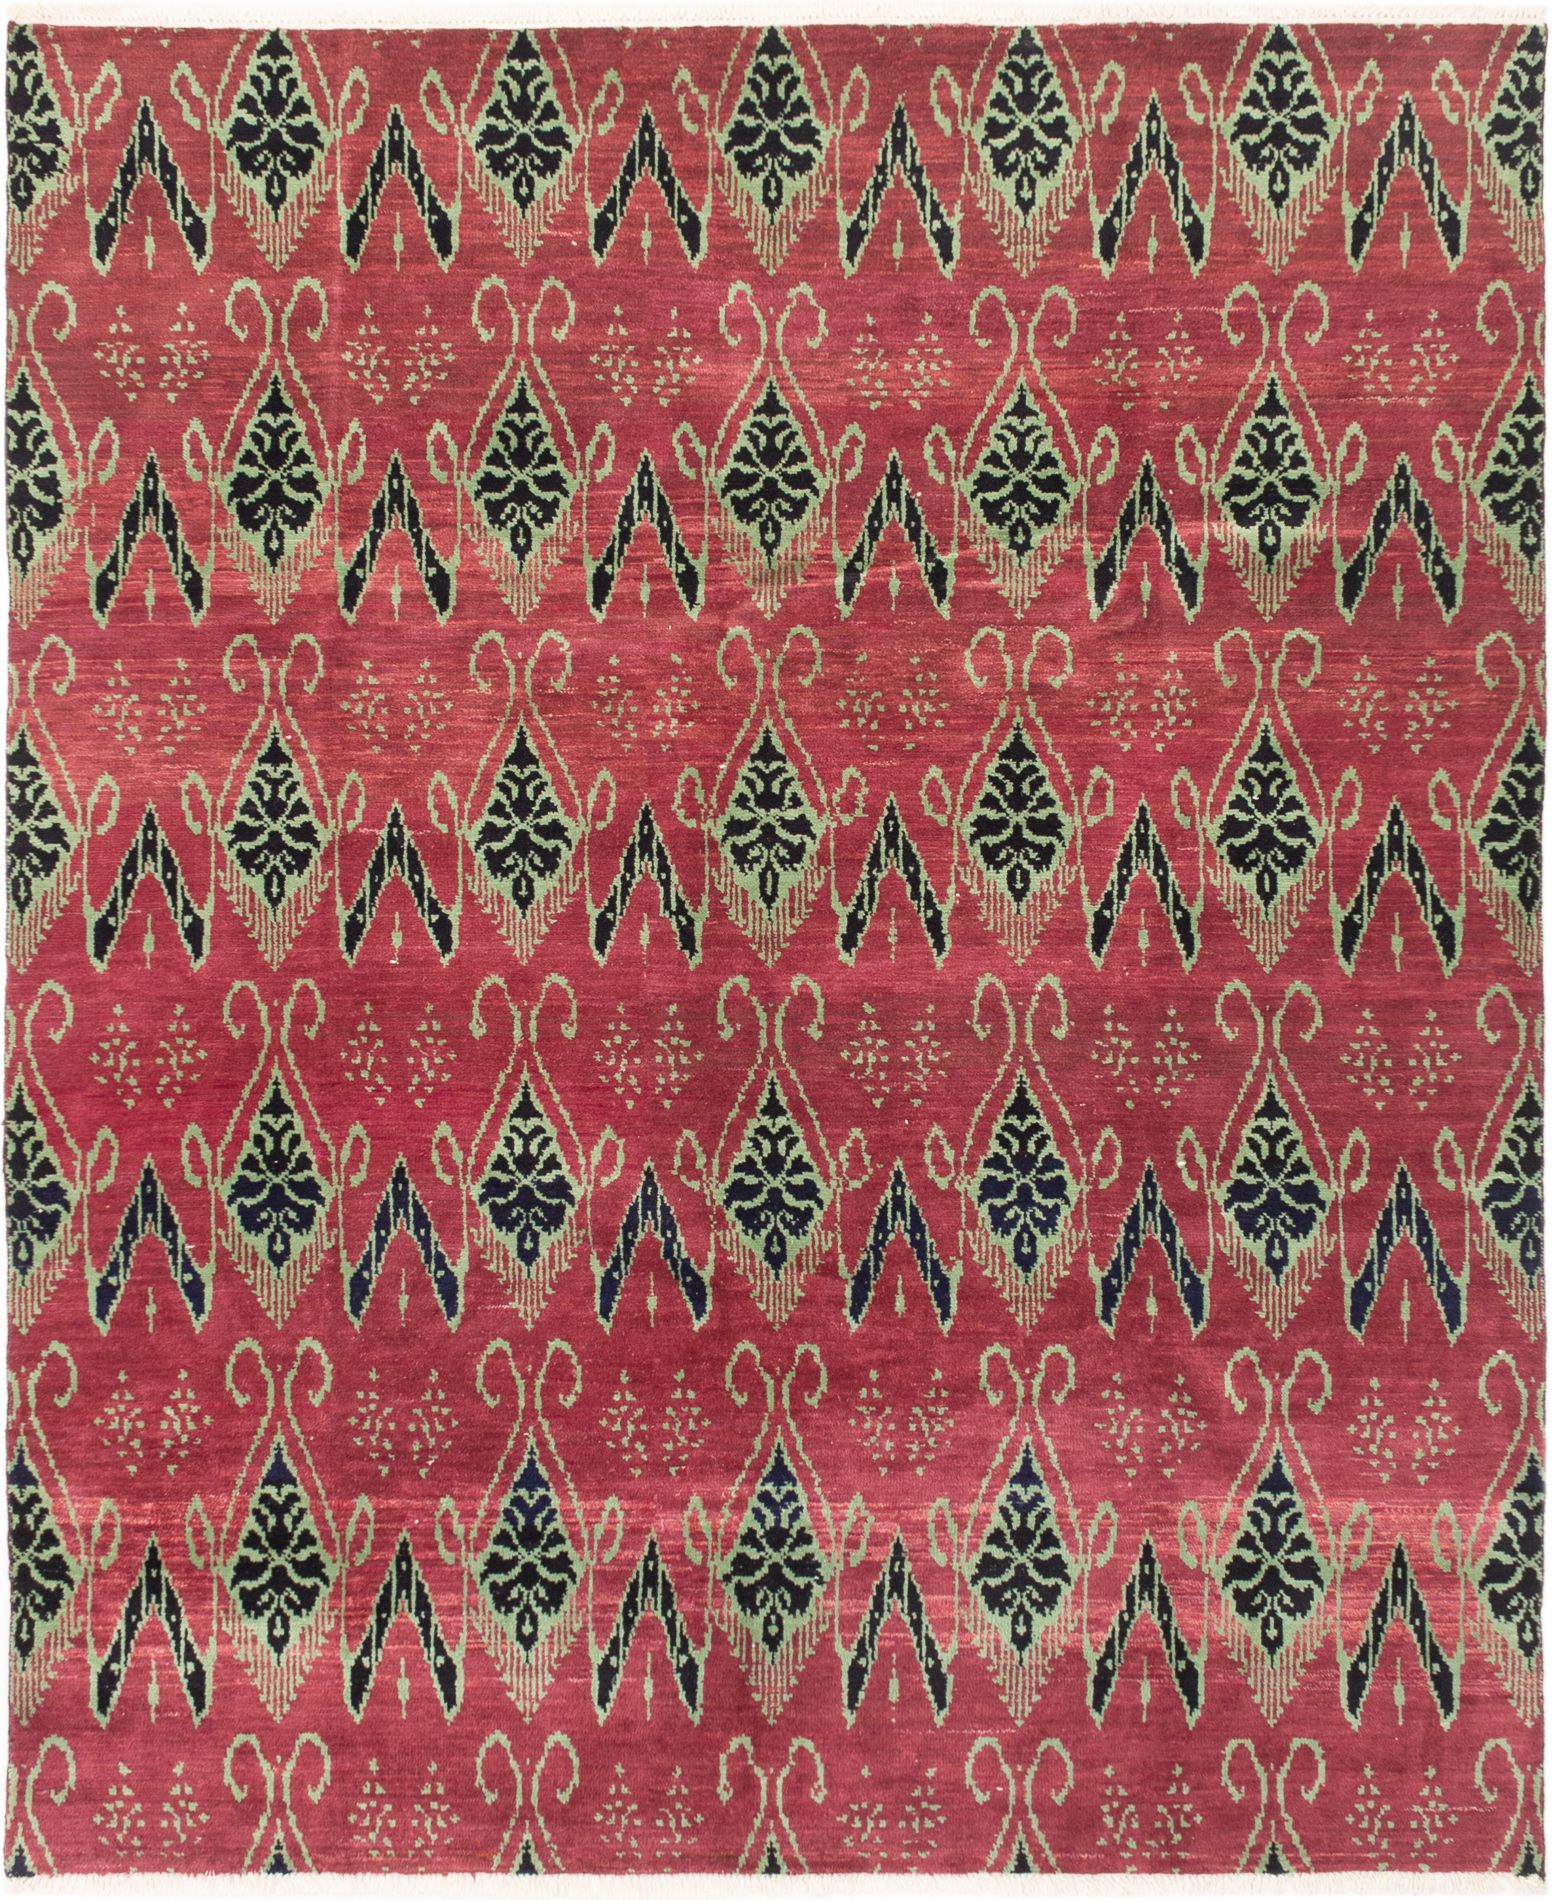 Hand-knotted Ikat Royale Burgundy Wool Rug 8'0" x 9'8" Size: 8'0" x 9'8"  